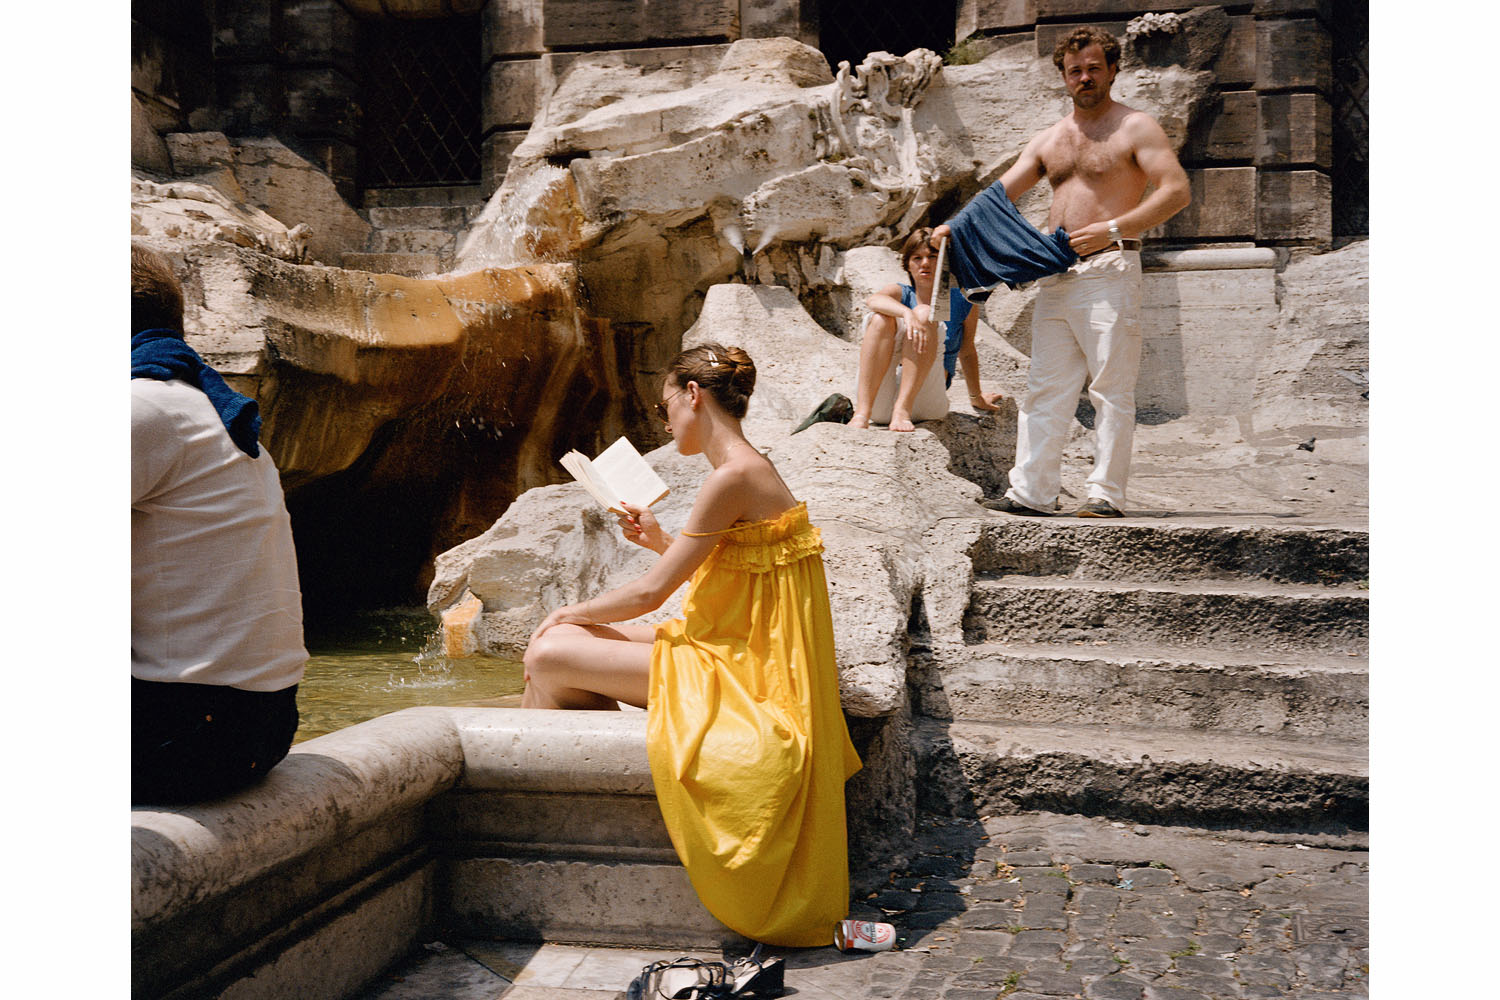 Dolce Via: Italy in the 1980s, Charles Traub